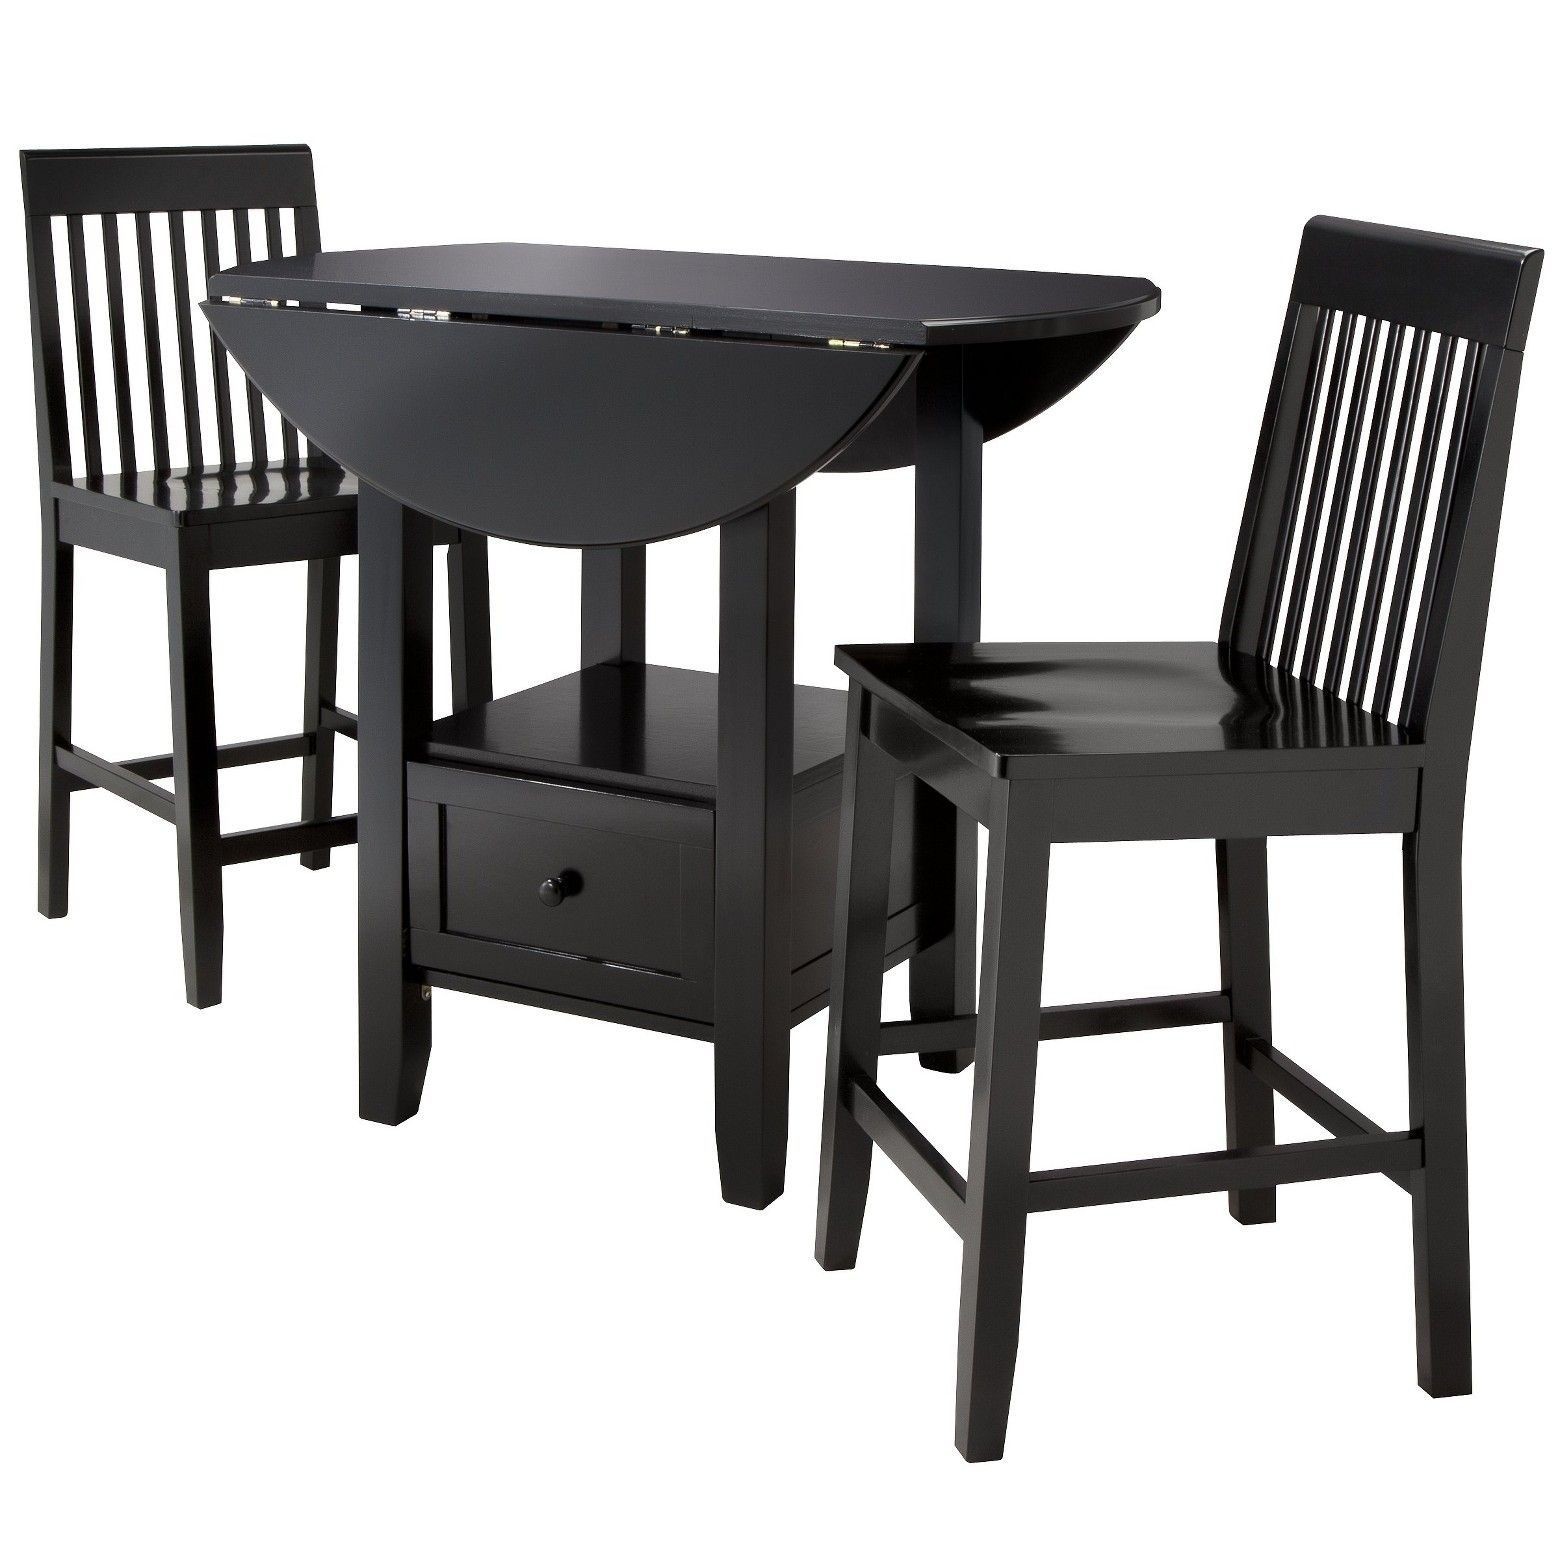 Black space saver table and chairs